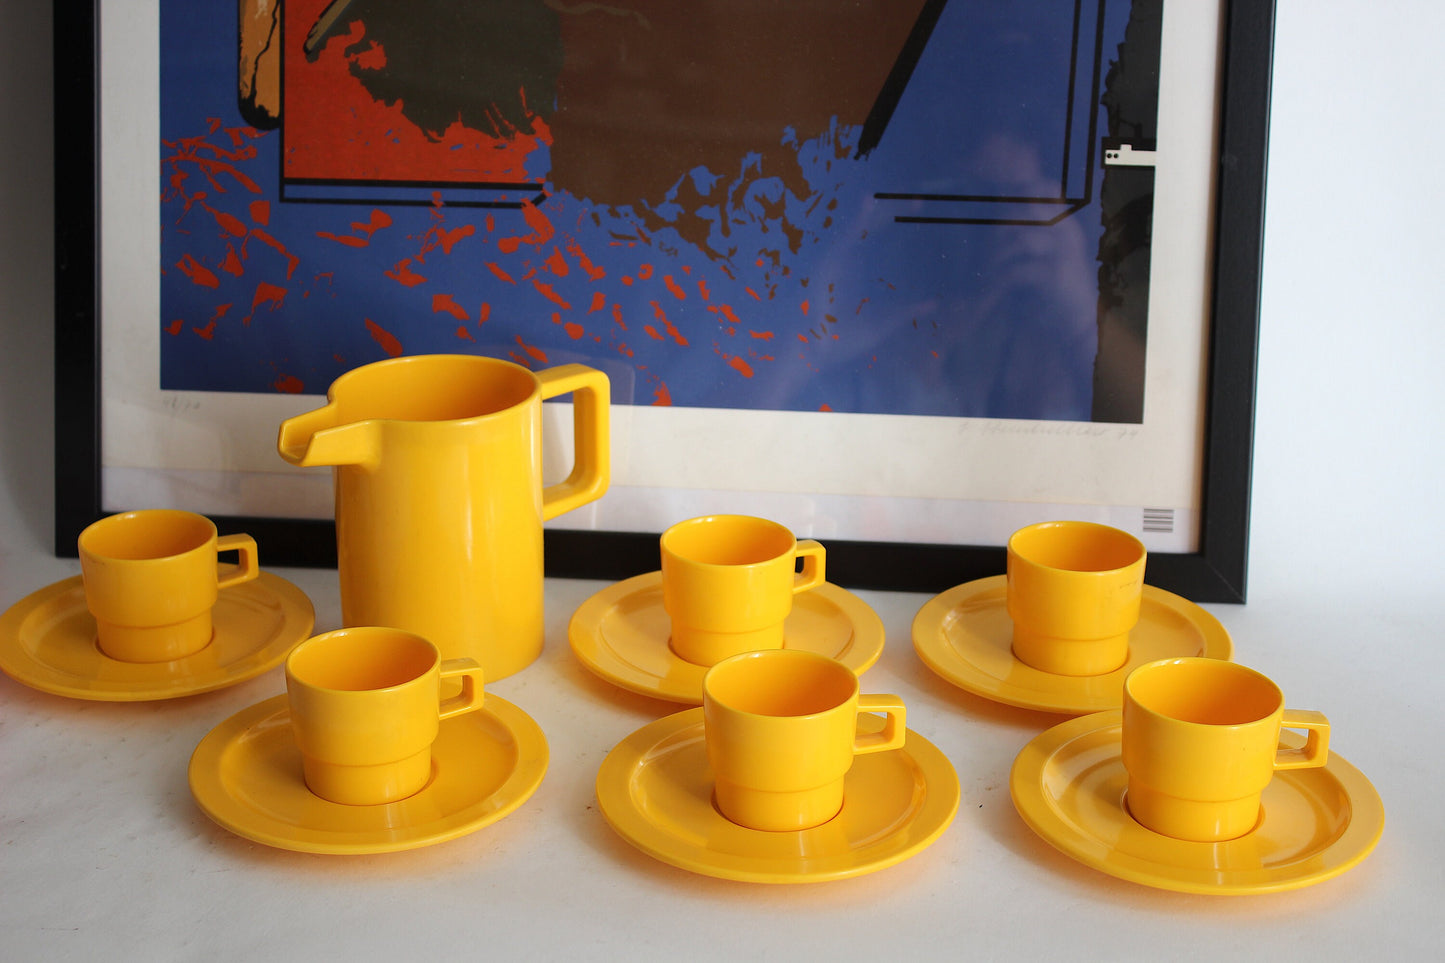 PORXELANE set of melamine coffee cups, saucers, and a matching pitcher. Efmen Spain, 1970s.